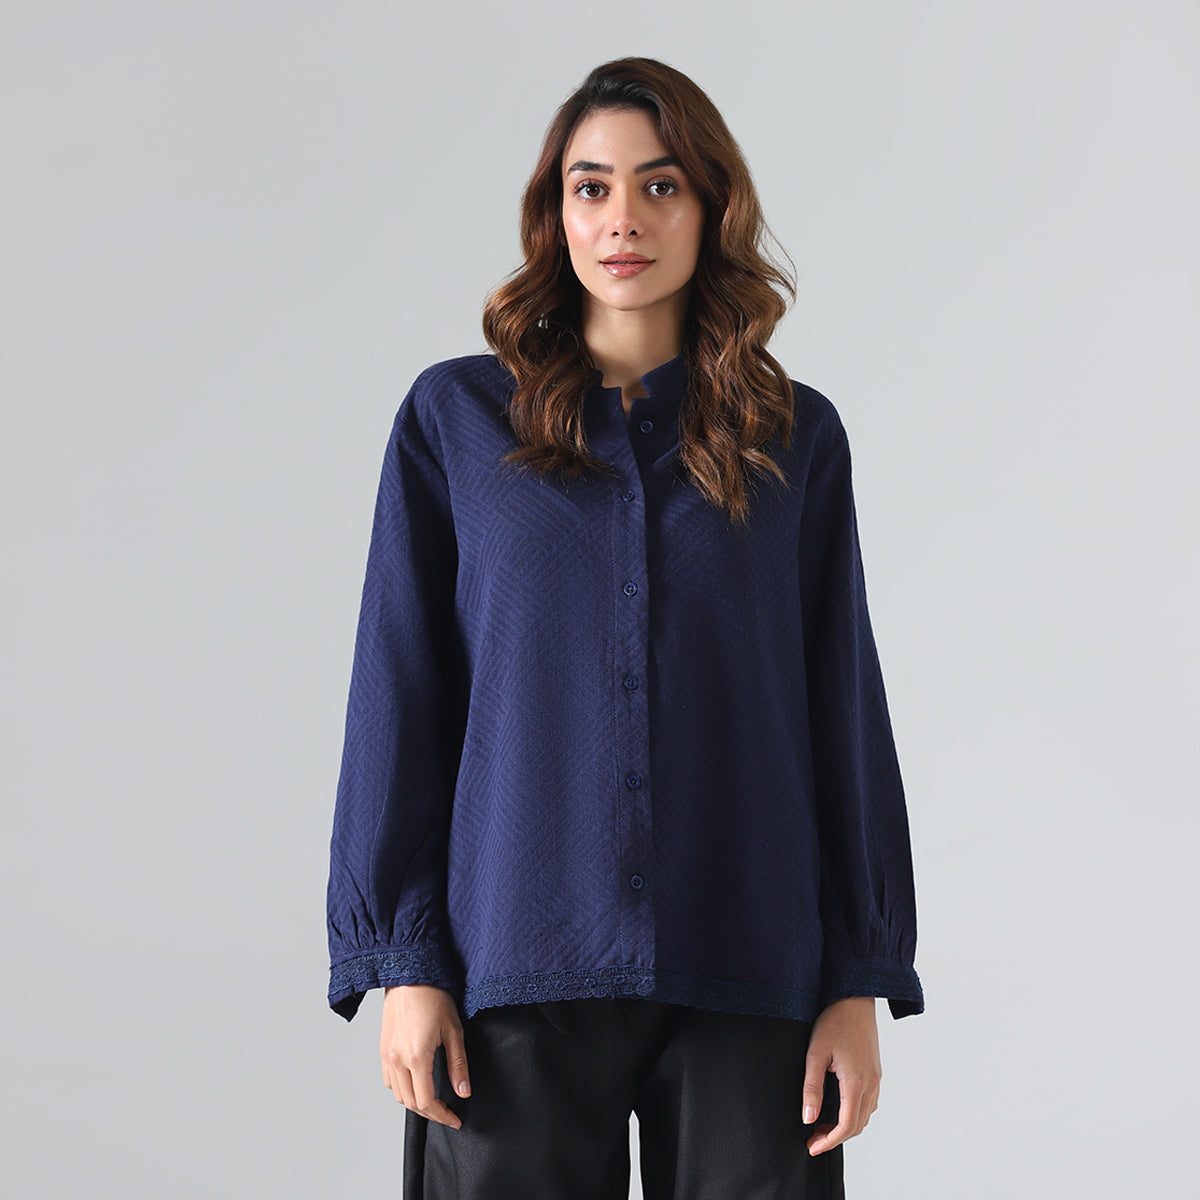 Embroidered Button TOP-HWWF322014